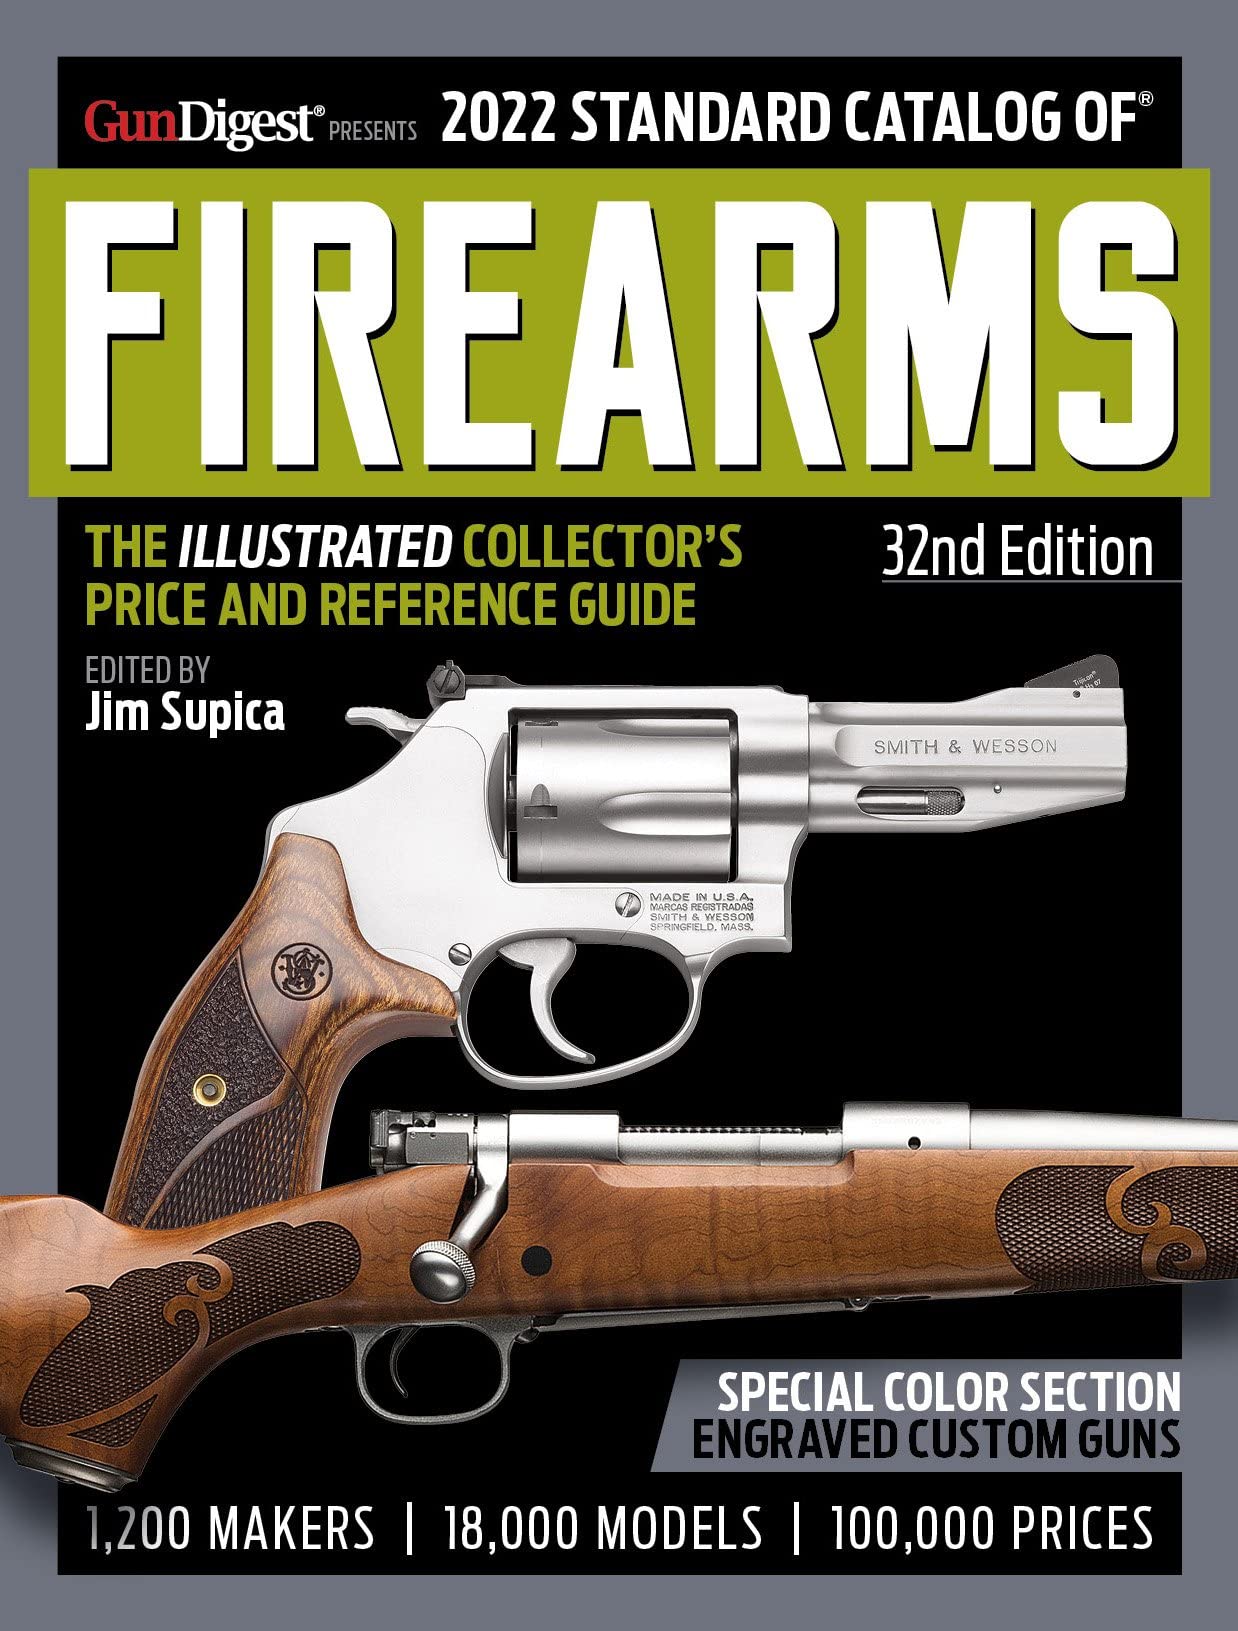 2022 Standard Catalog of Firearms, 32nd Edition: The Illustrated Collector's Price and Reference Guide (Readers Digest: Standard Catalog of Fir...